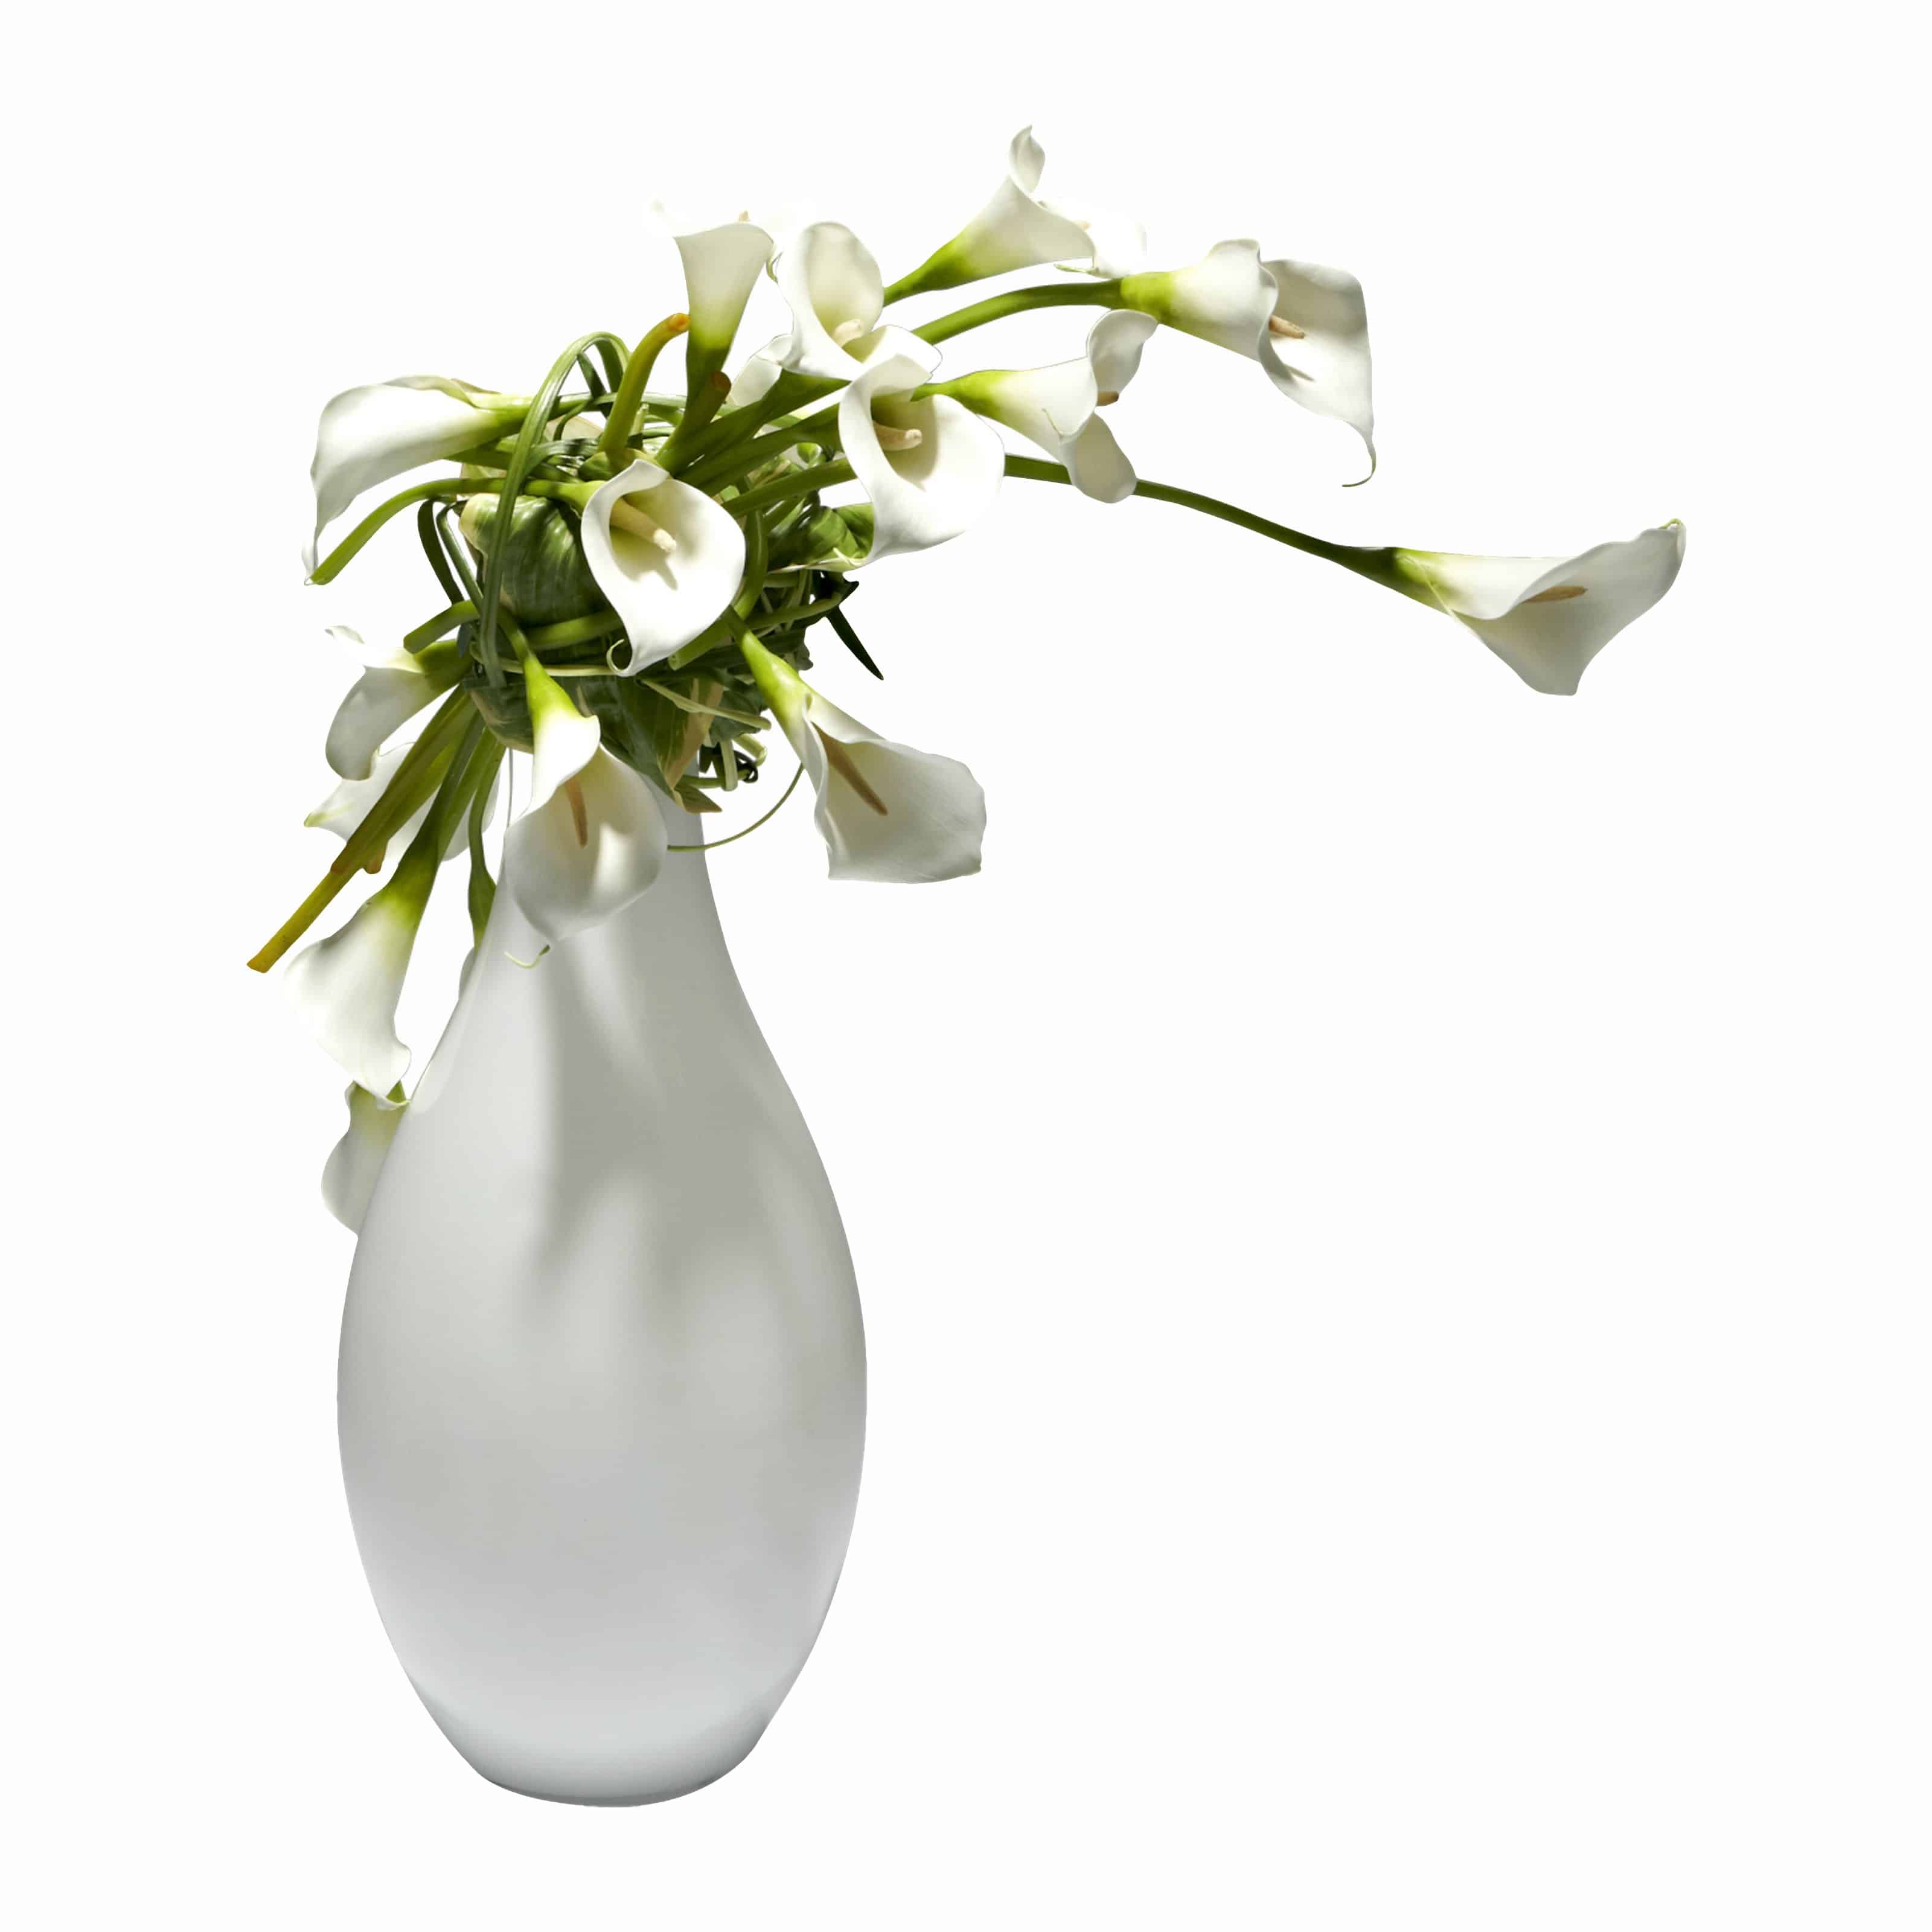 Shop for our modern arrangement of pure white silk calla lily flowers in a white glass vase. Using our immaculate faux calla lilies for this stylish design.